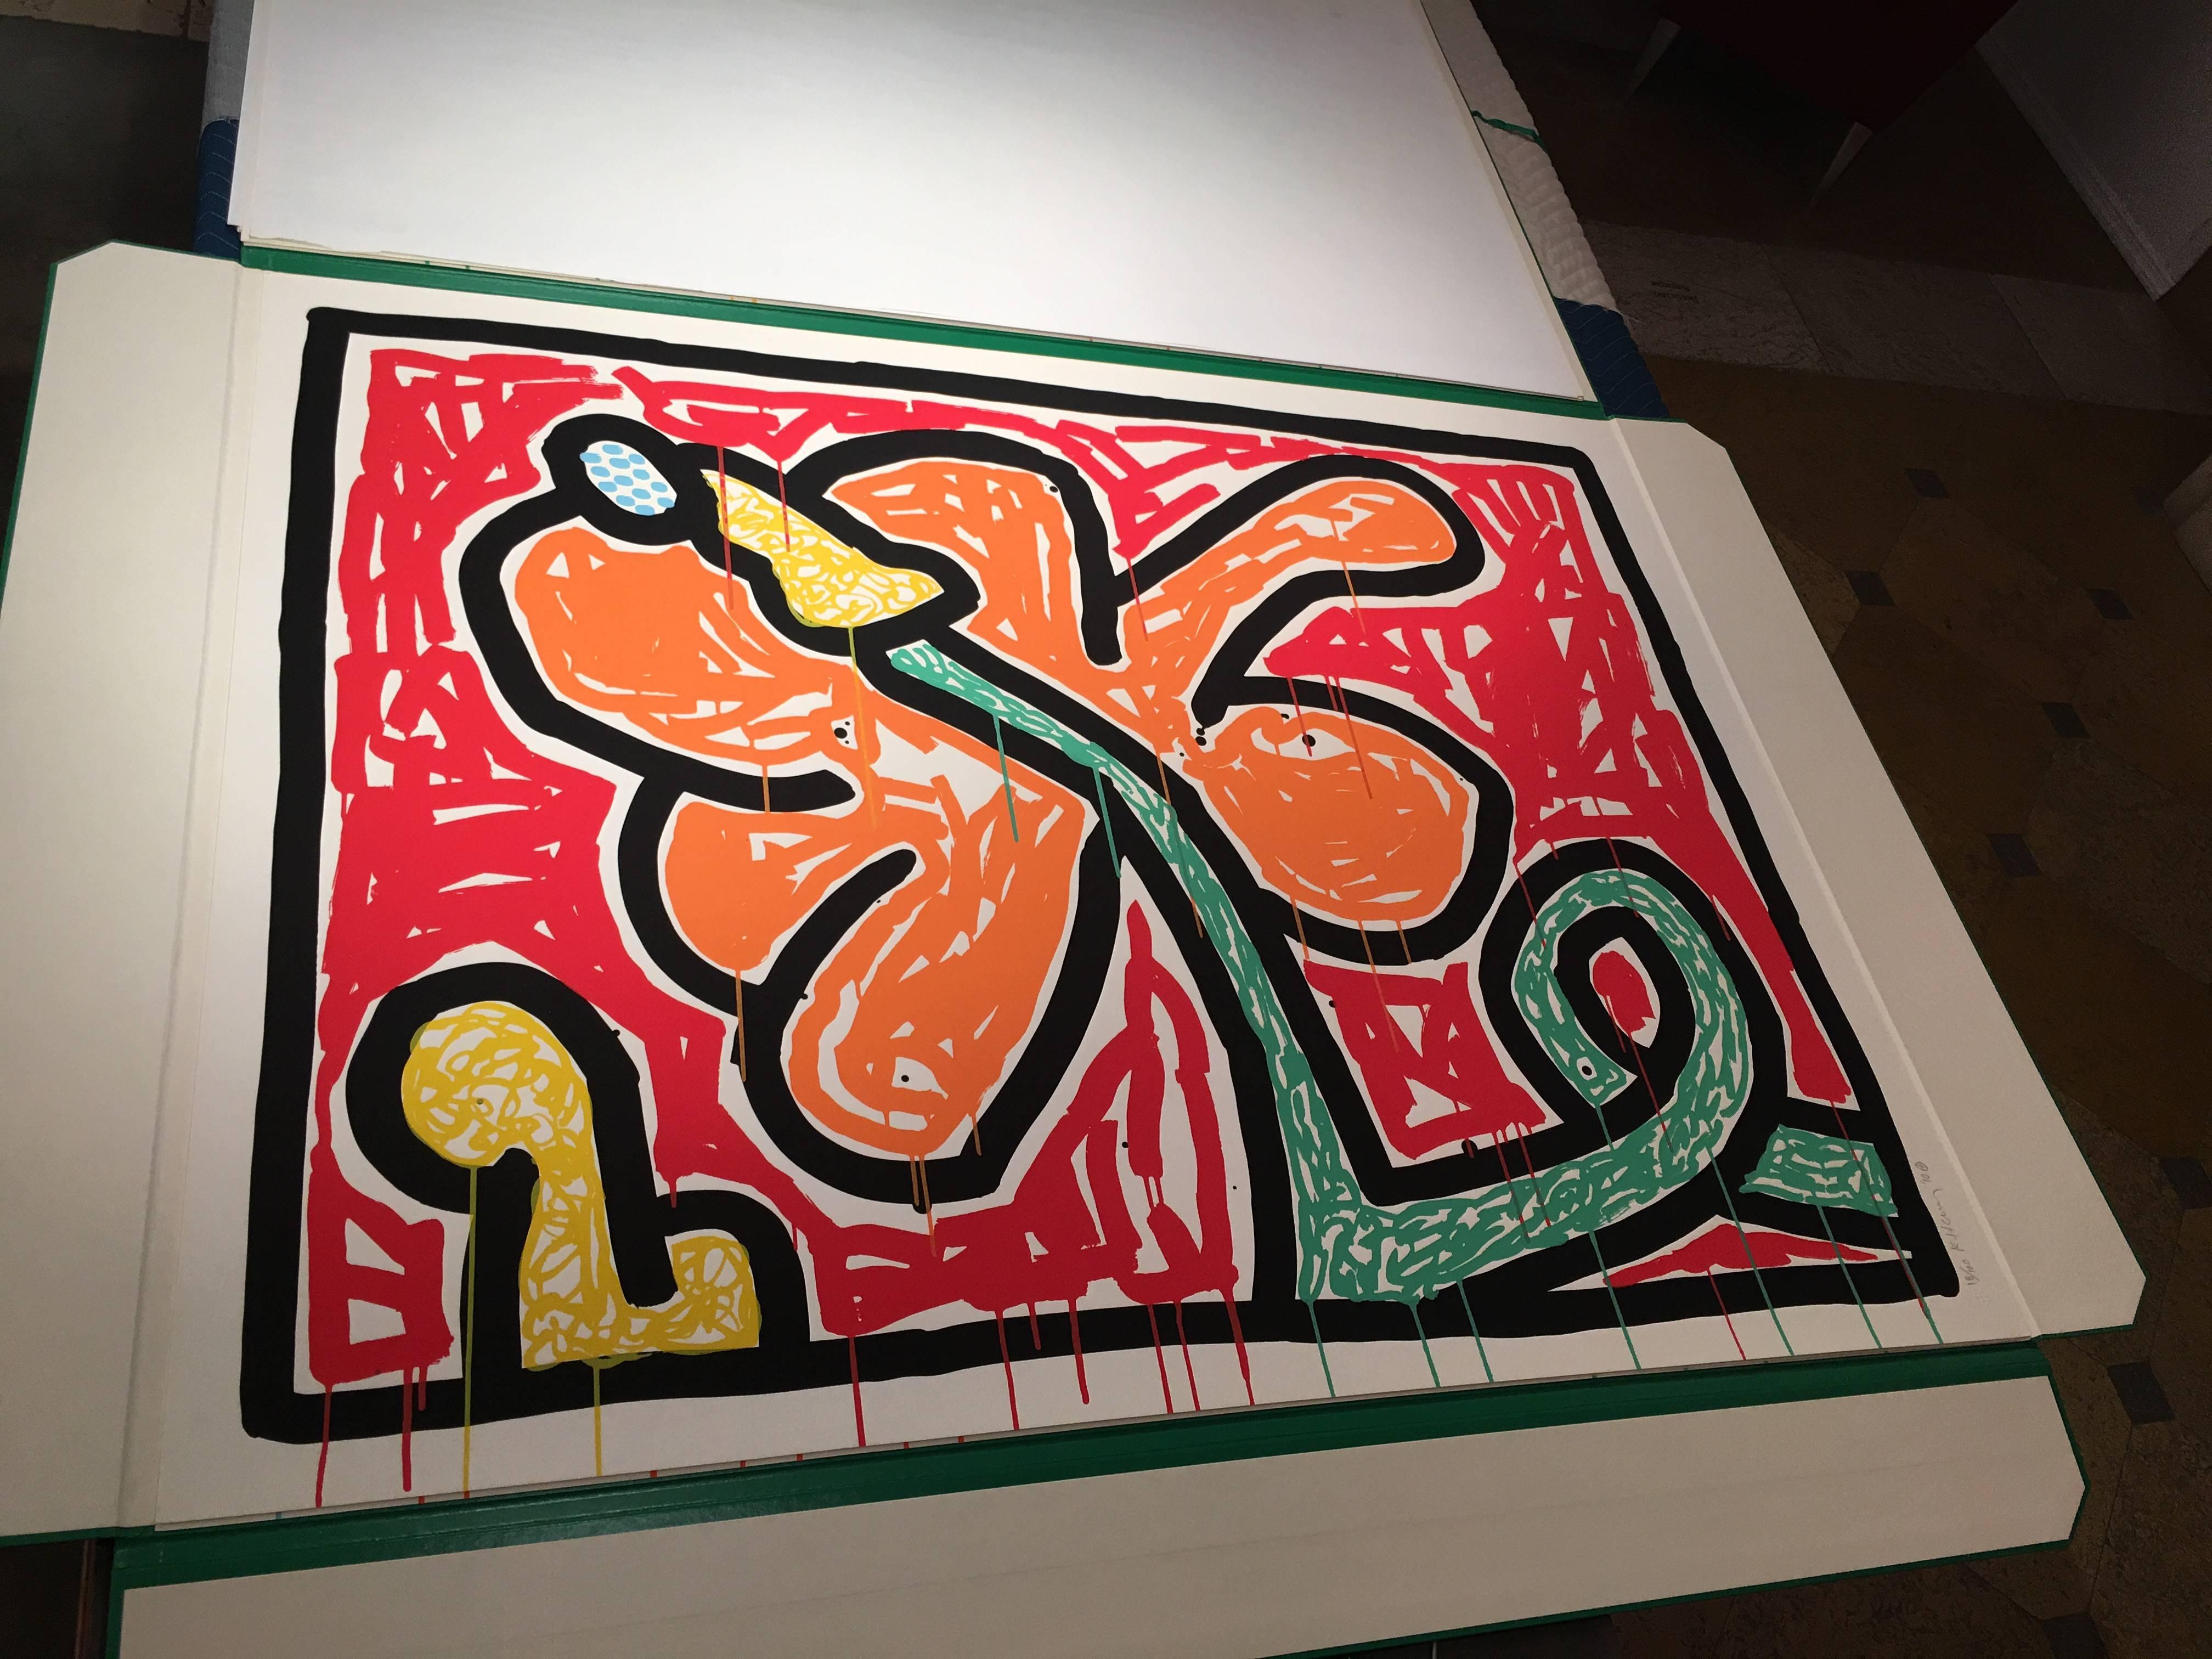 Flowers (5) - Print by Keith Haring